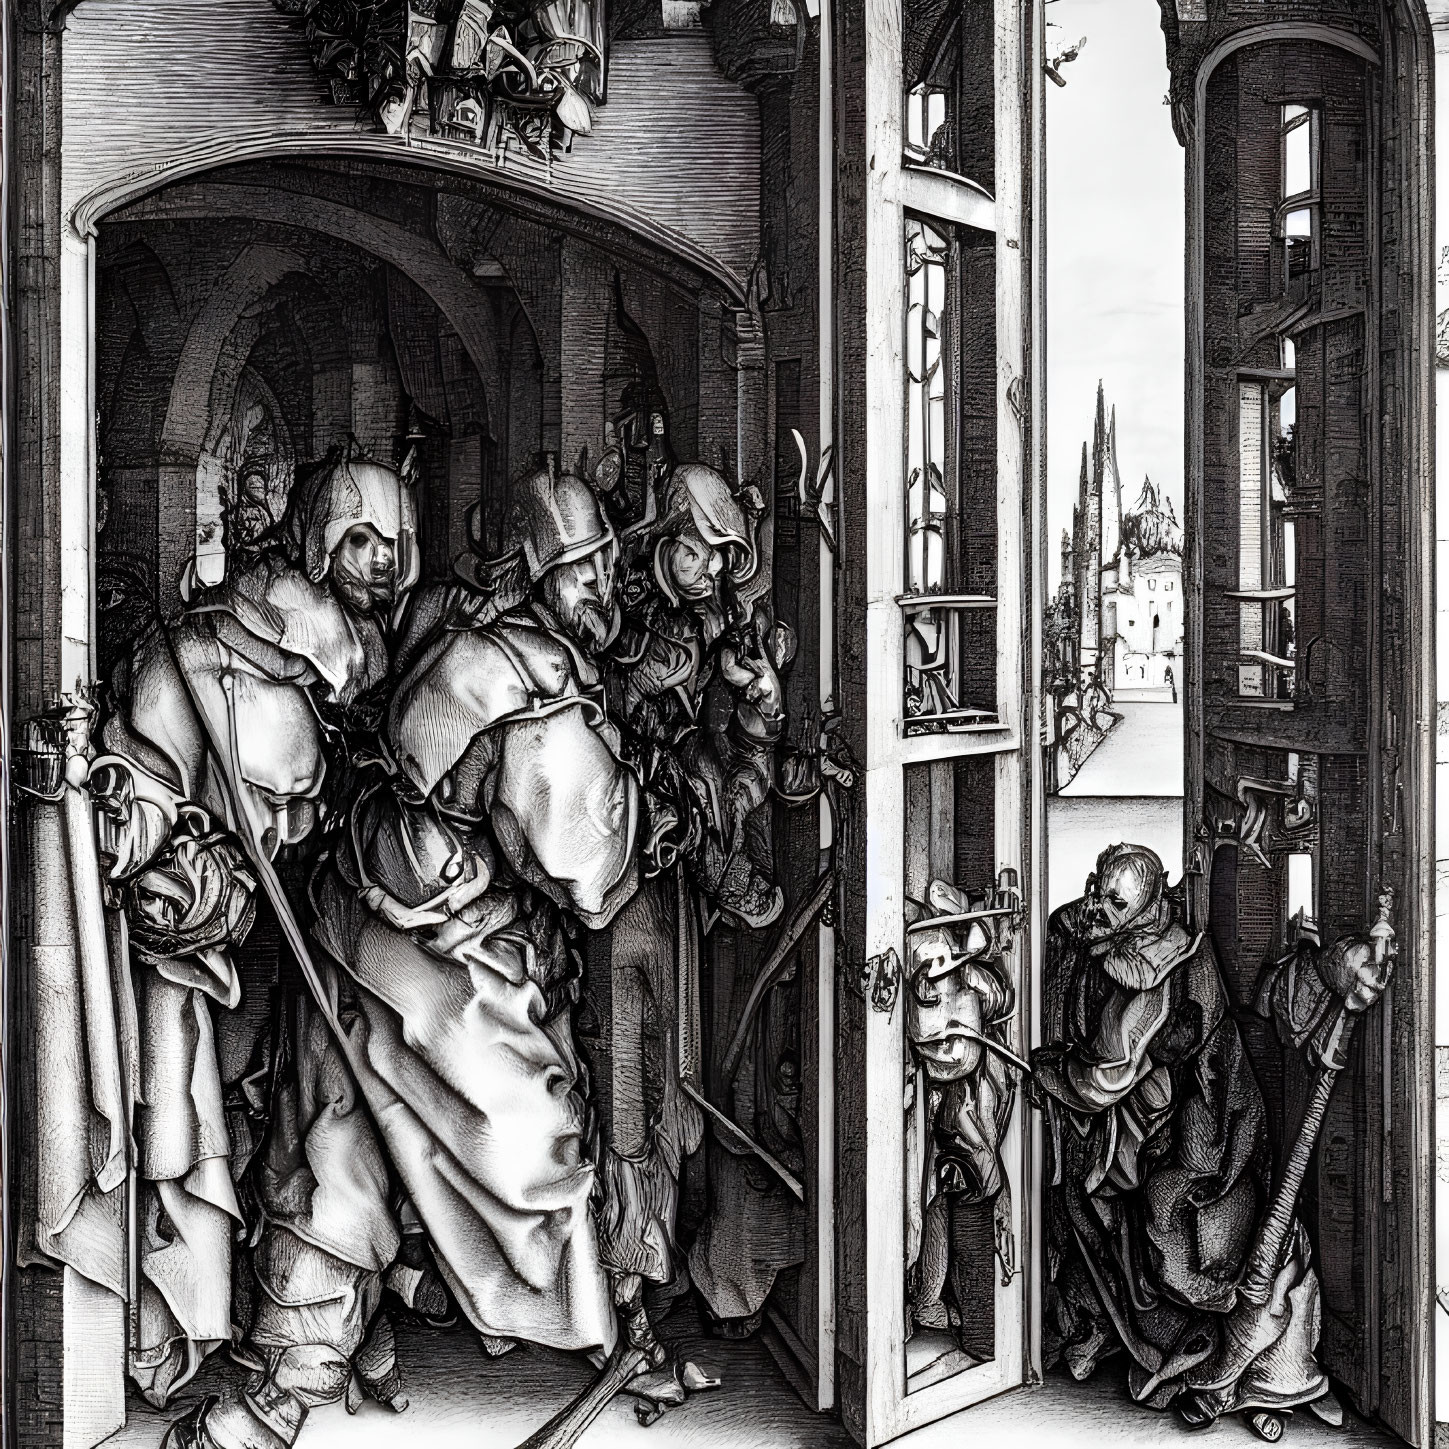 Intricate black and white engraving of armored knights in archway